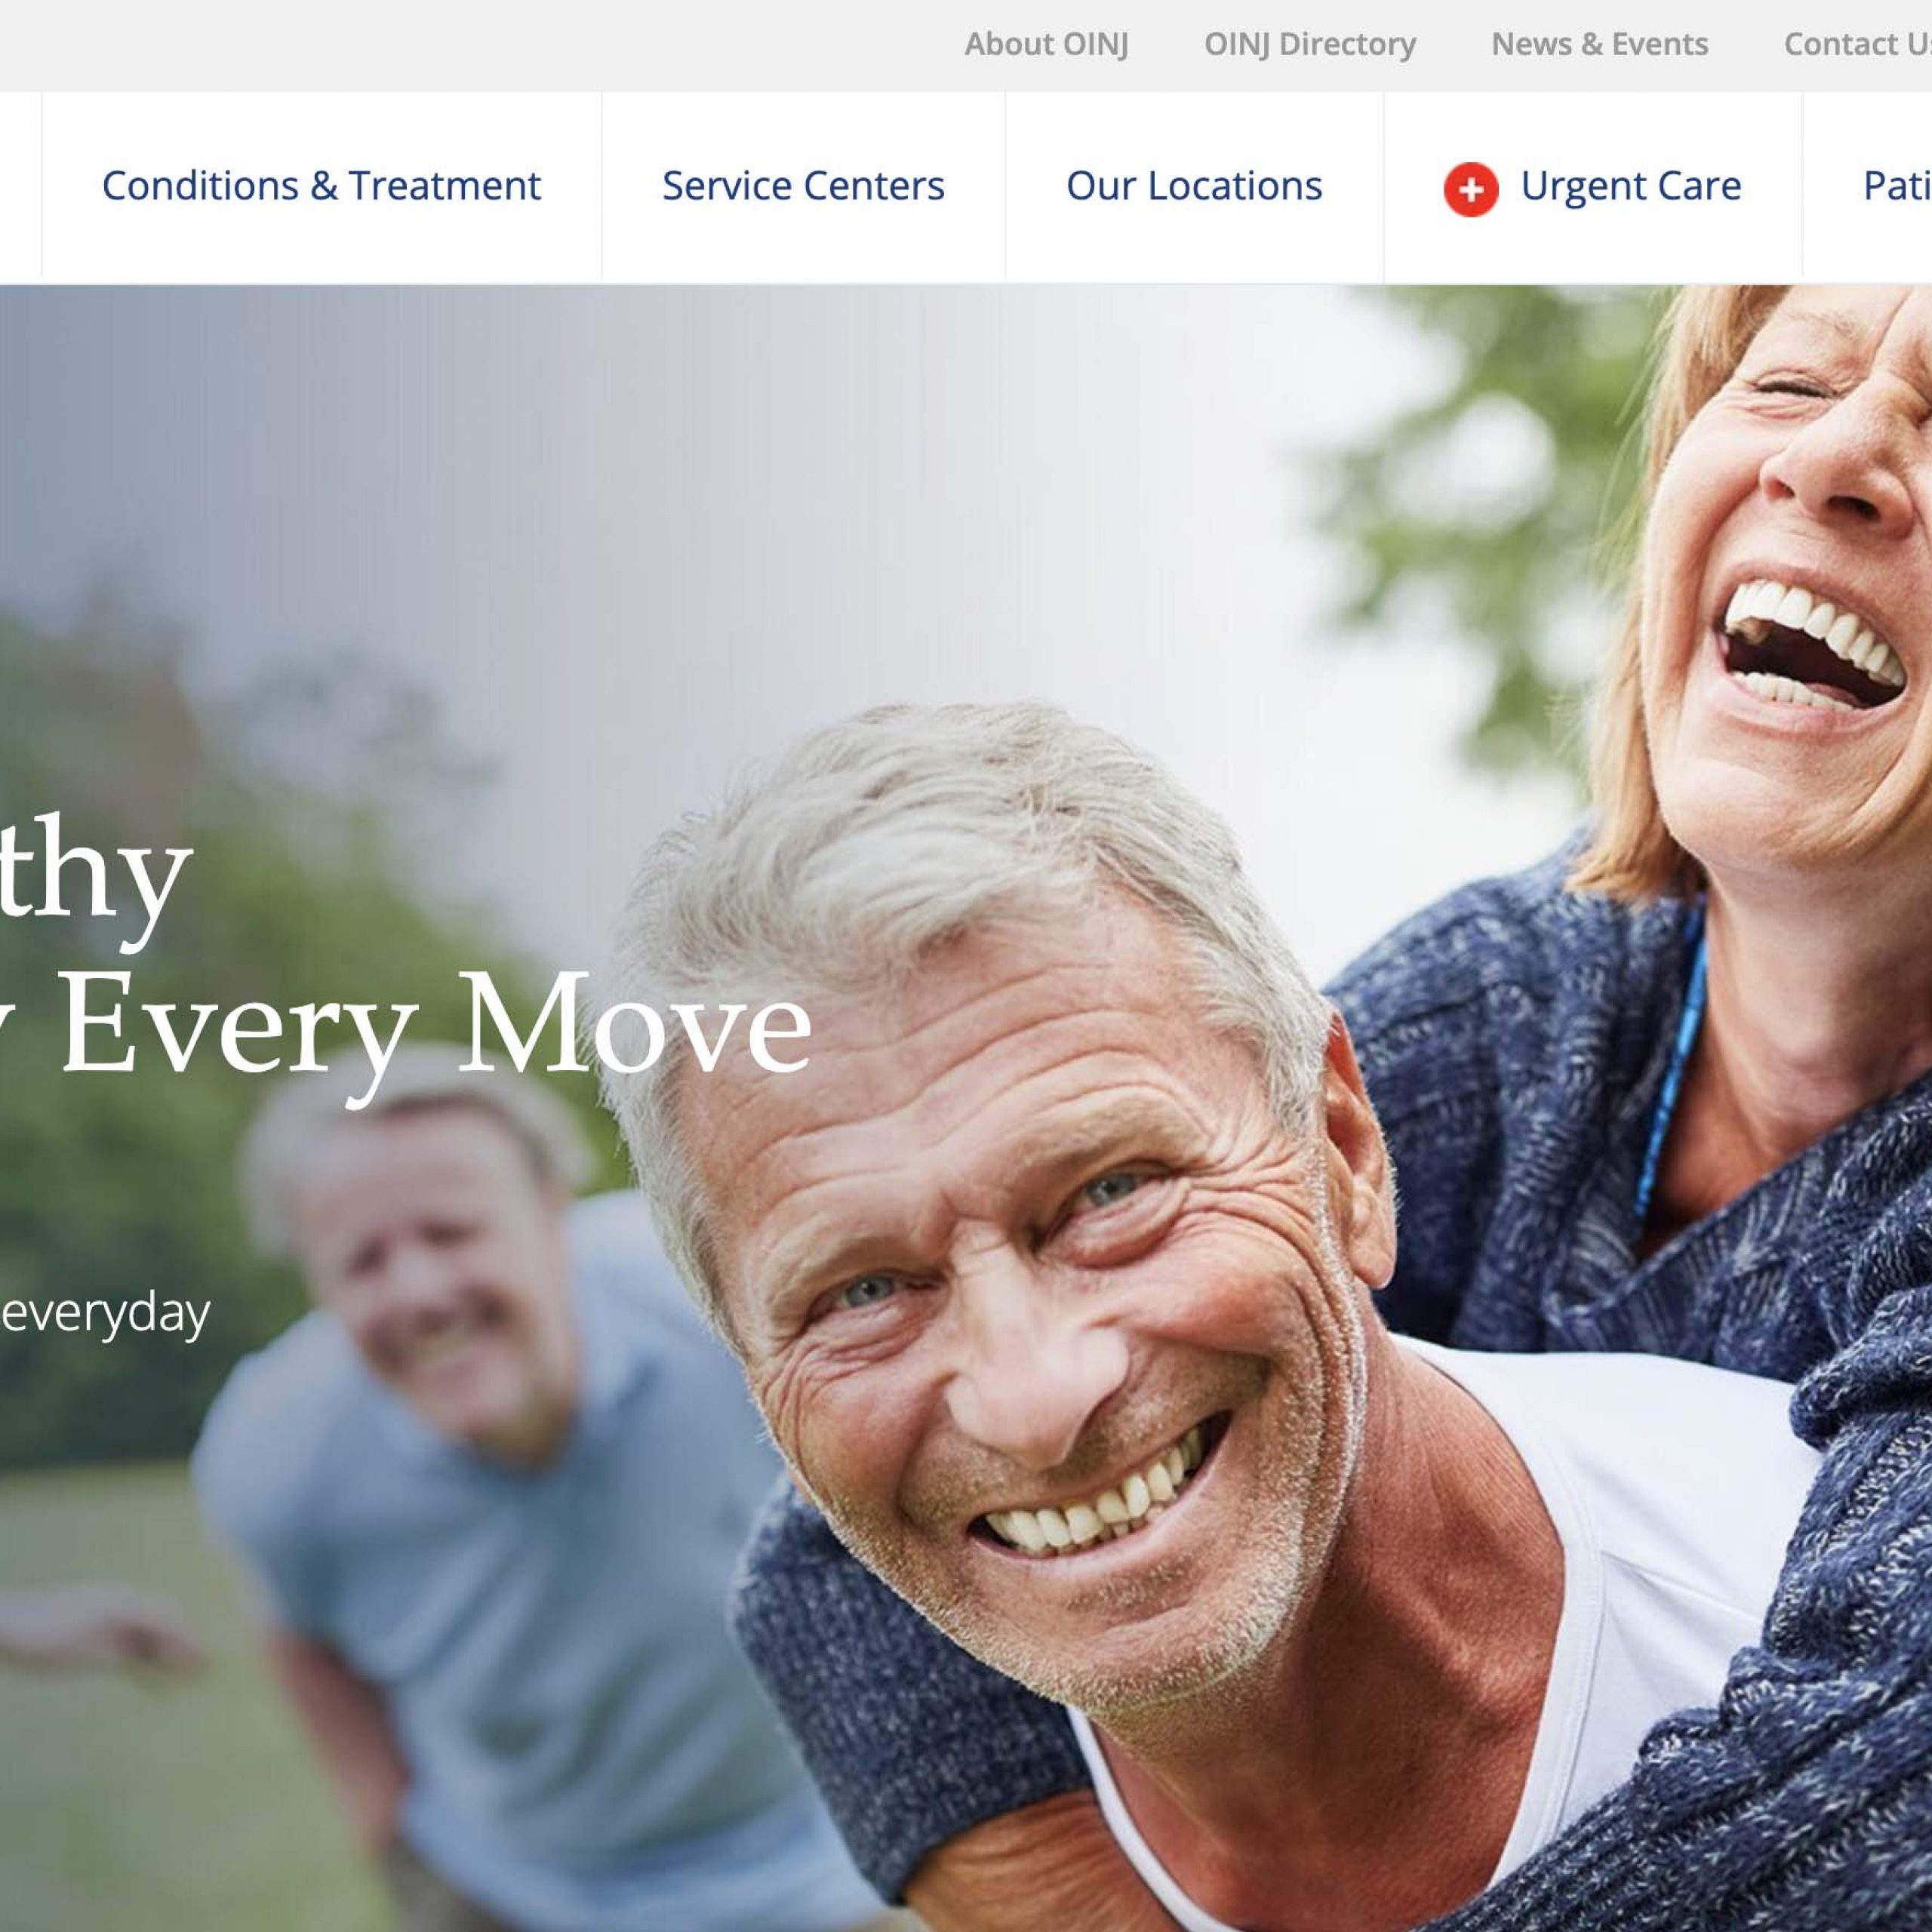 The orthopedic institute of new jersey business & corporate responsive design